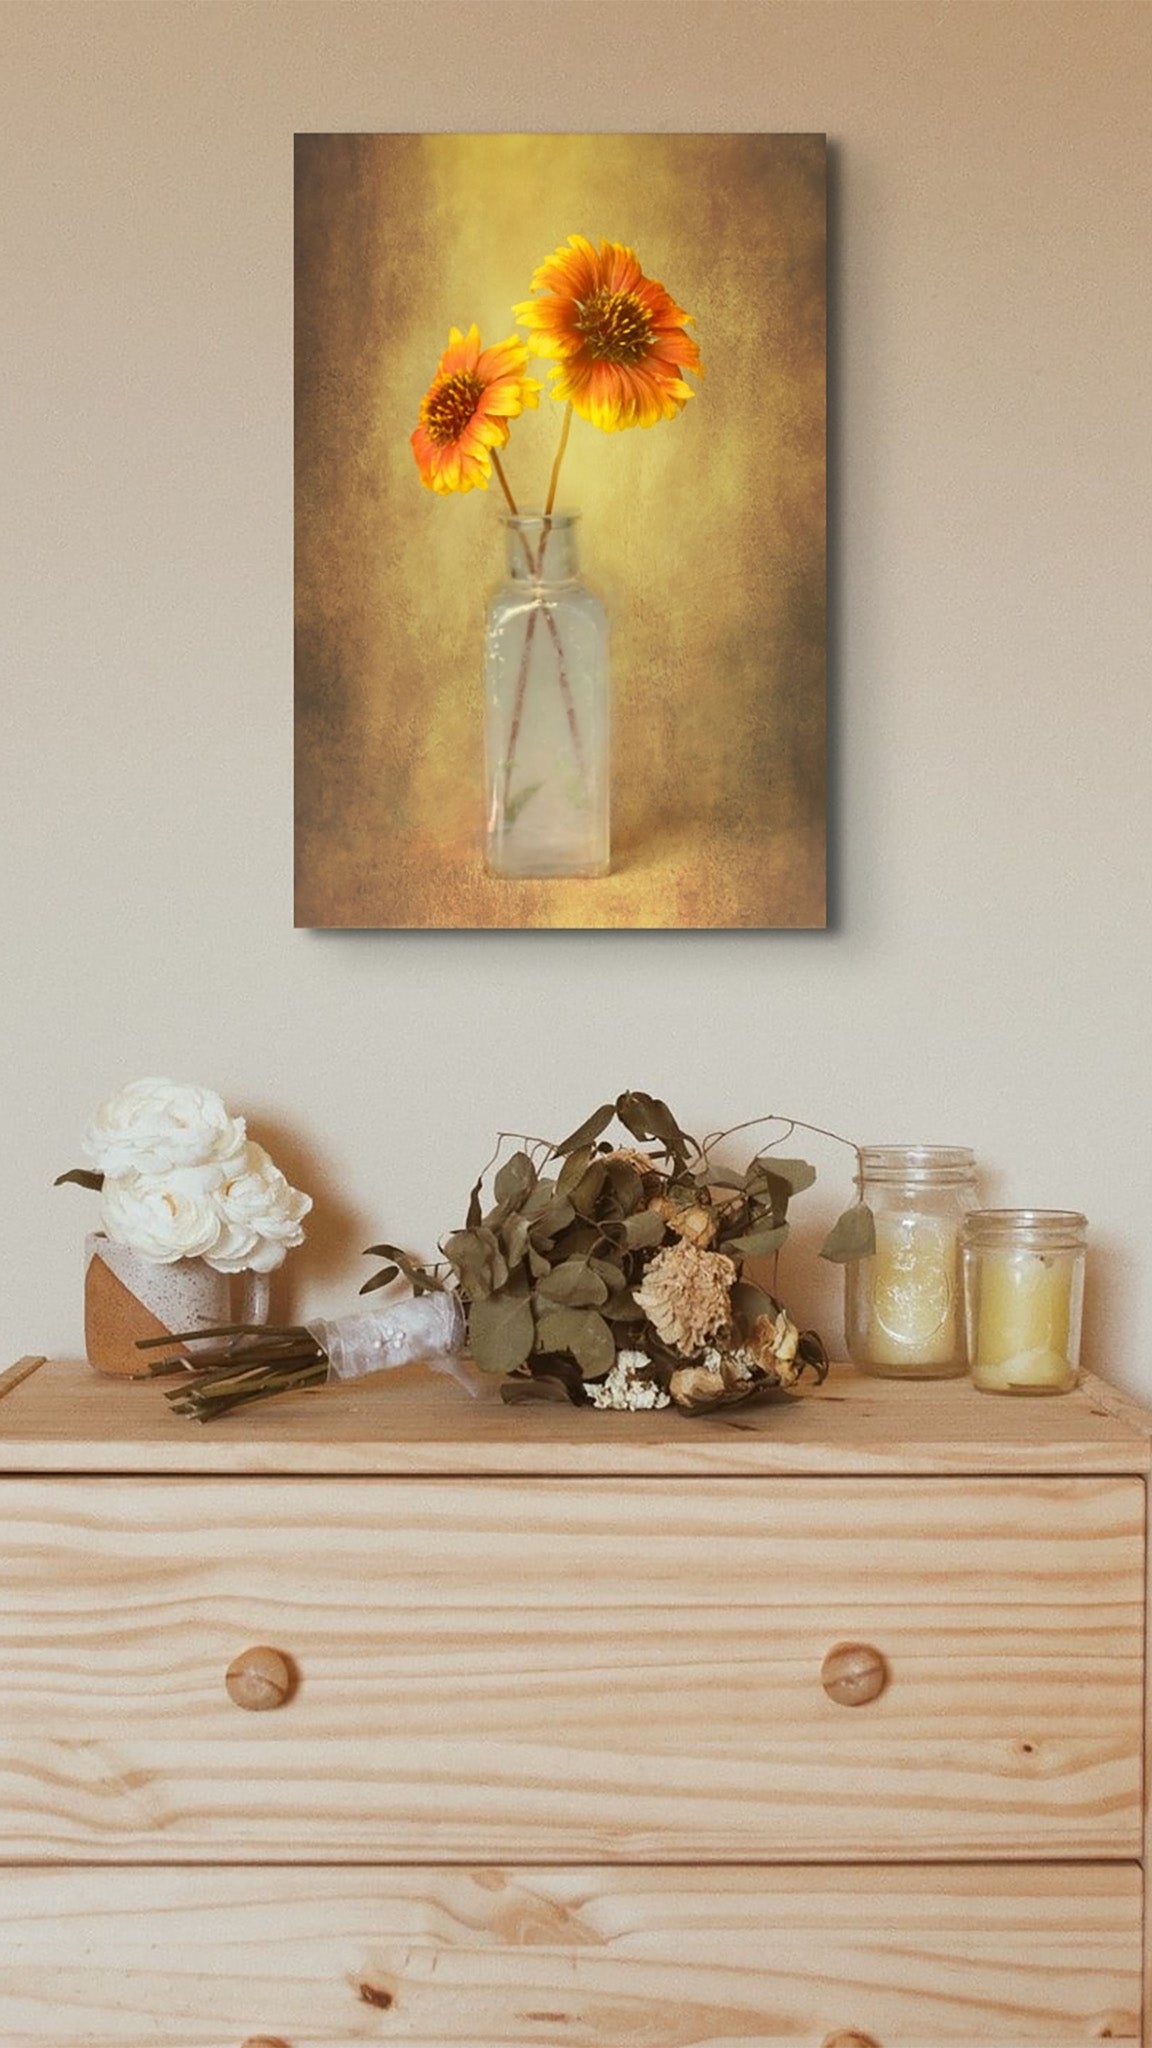 Picture hanging on the wall of a room over a chest of drawers. The picture is a fine art photograph of yellow treasure flowers in old bottle titled "Yellow Treasure" by Cameron Dreaux of Dreaux Fine Art.